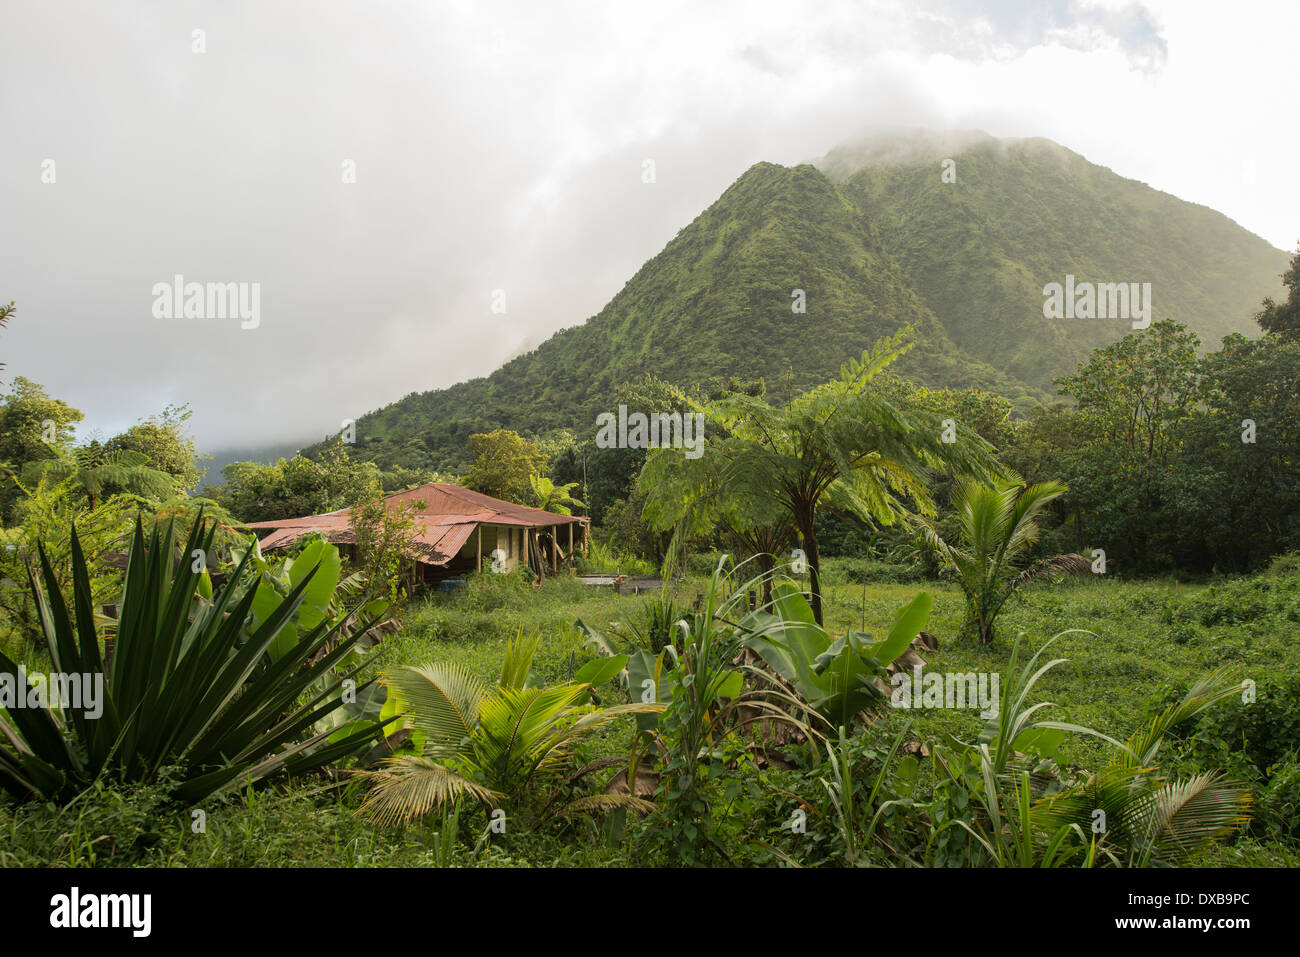 Fern and recreation and agricultural farm in front of volcano belonging to Pitons du Carbet, Martinique, French West Indies Stock Photo